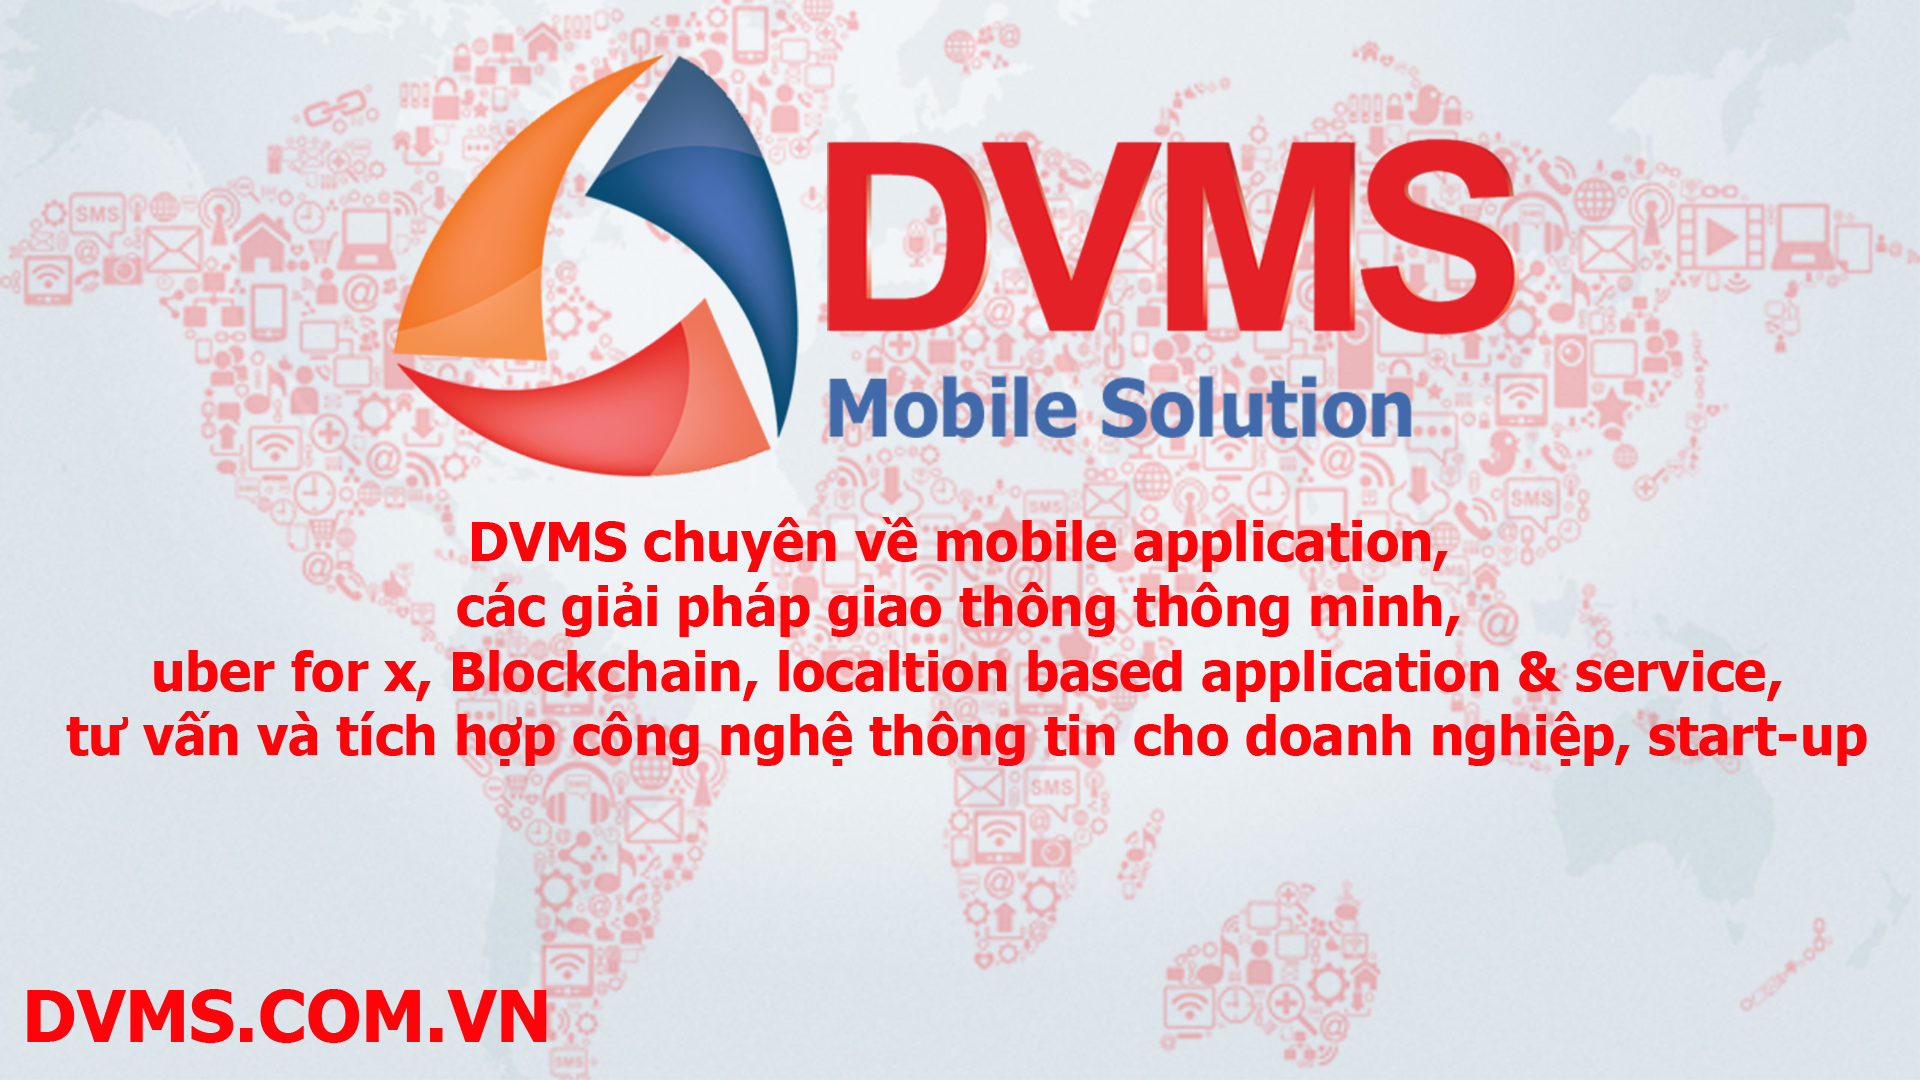 mobile solution all the world